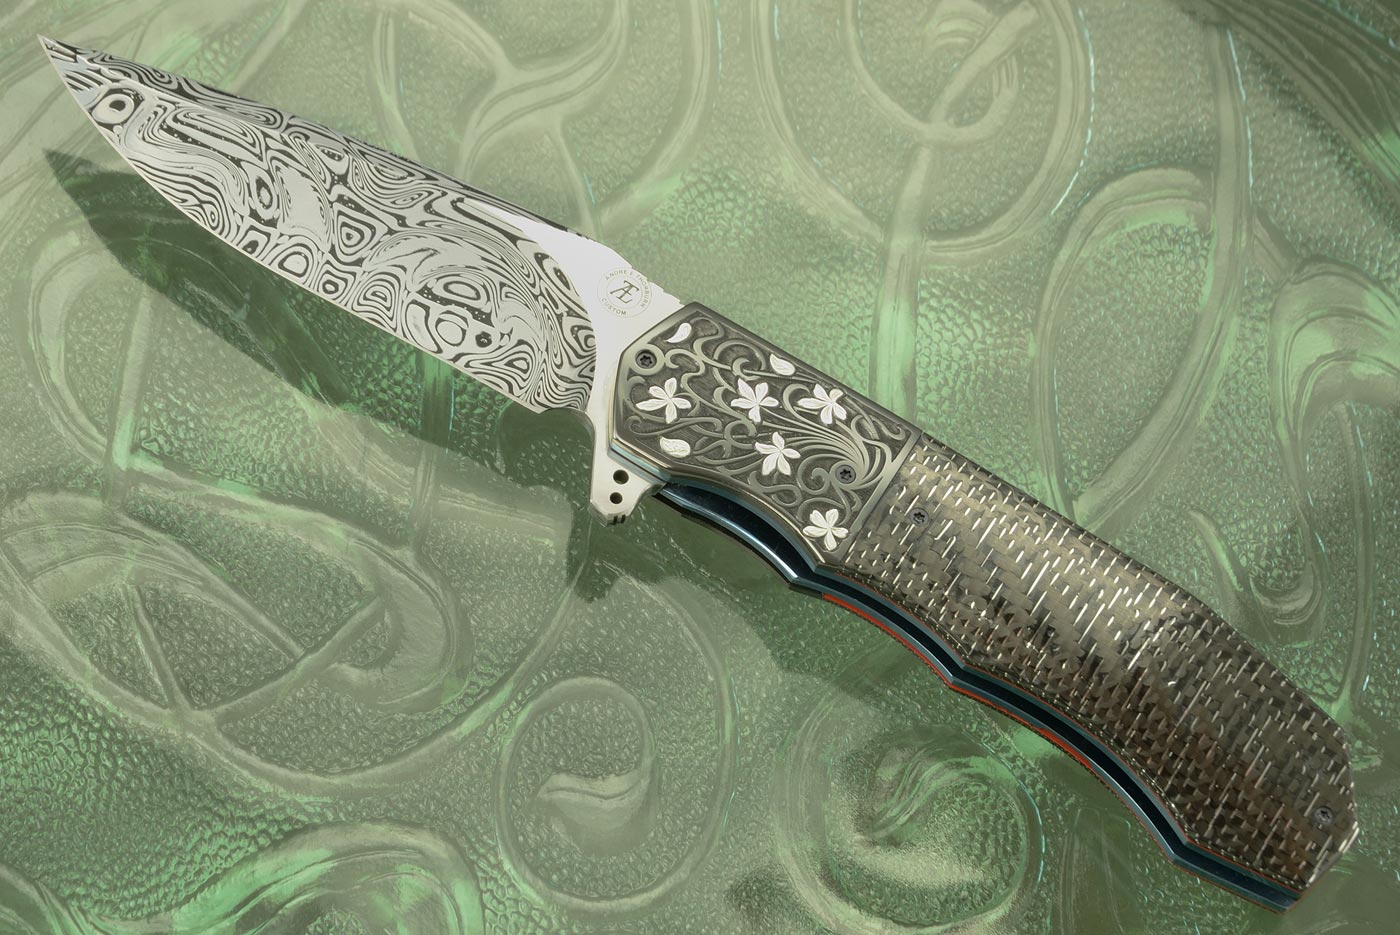 L44 Compact Flipper with Damascus, Nickel Wire Carbon Fiber, and Engraved Zirconium with Silver Inlay (Ceramic IKBS)